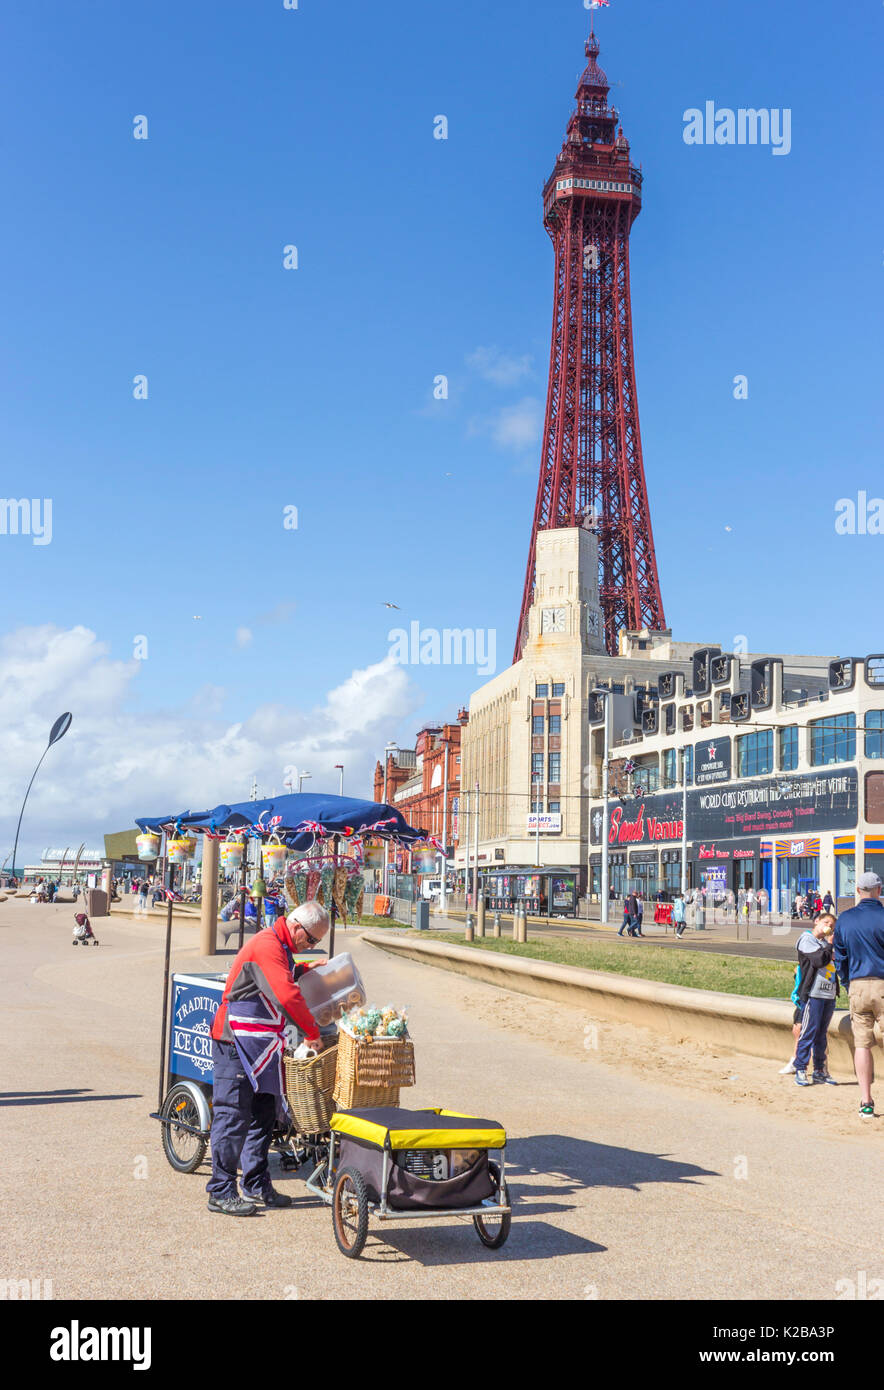 Blackpool, Fylde Coast, Lancashire, England. Ice-cream and popcorn seller on the promenade.  The Blackpool Tower in the background. Stock Photo